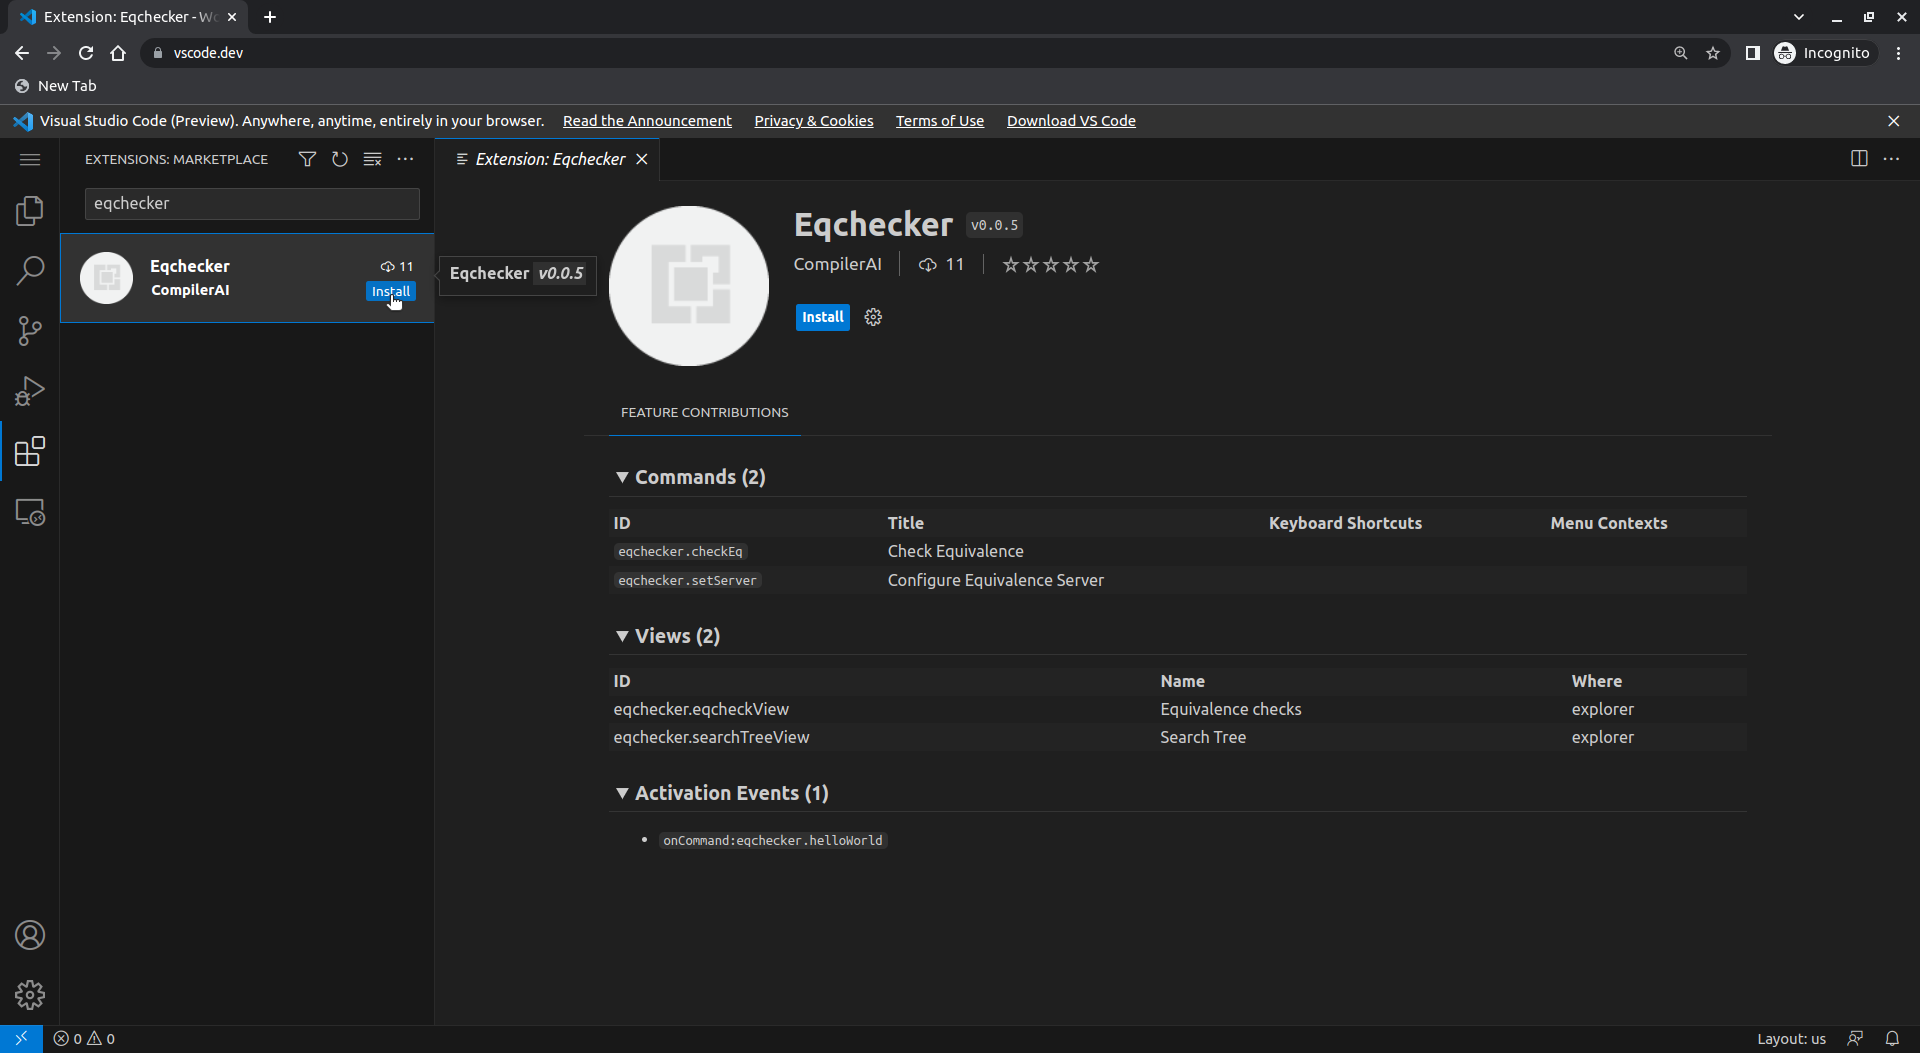 Install the Eqchecker extension